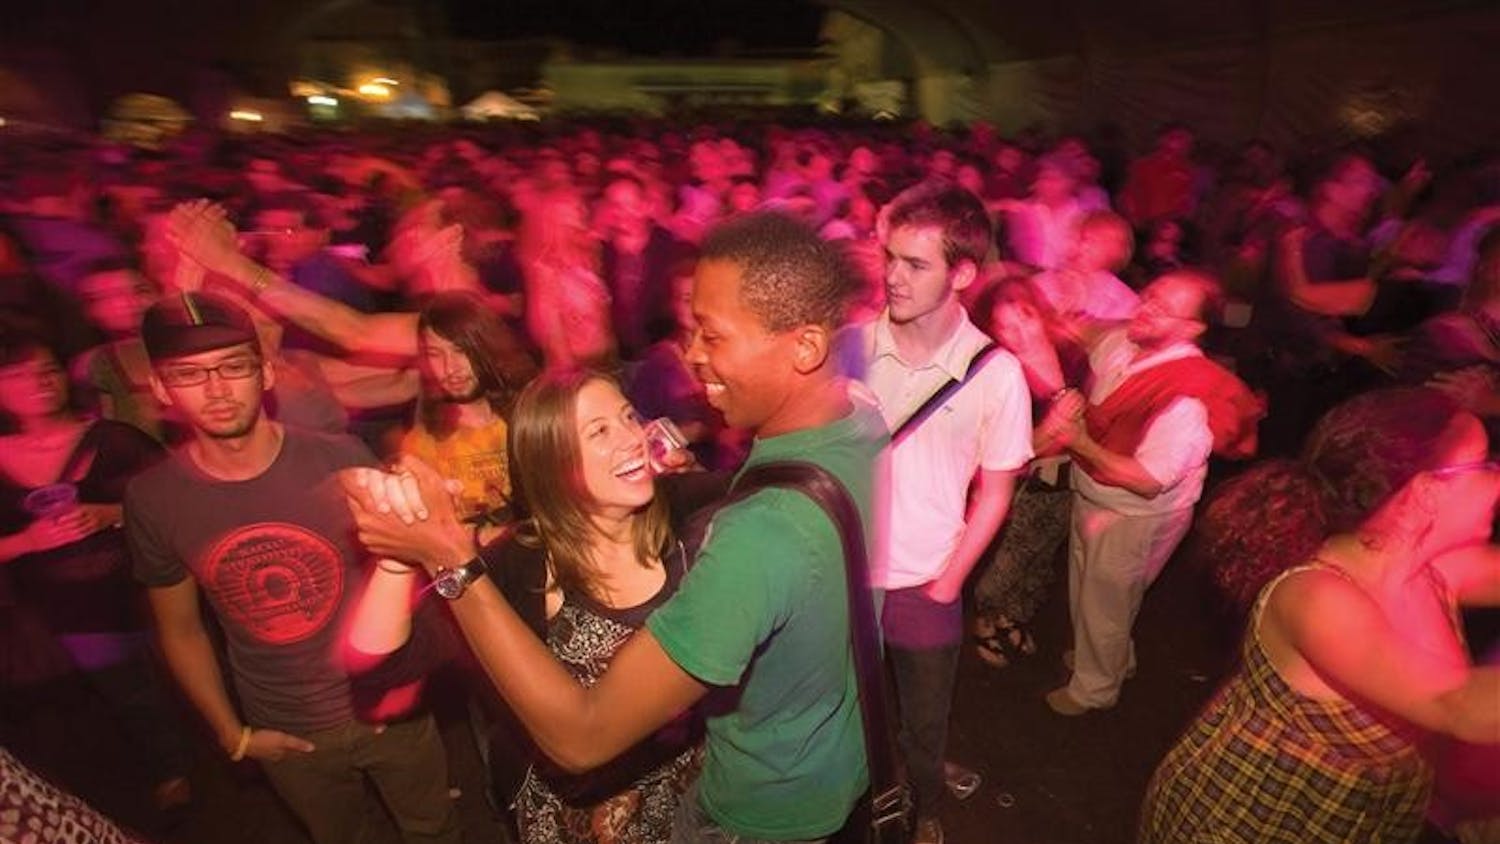 People dance during a performance at Lotus Festival on Saturday, September 29, 2007.